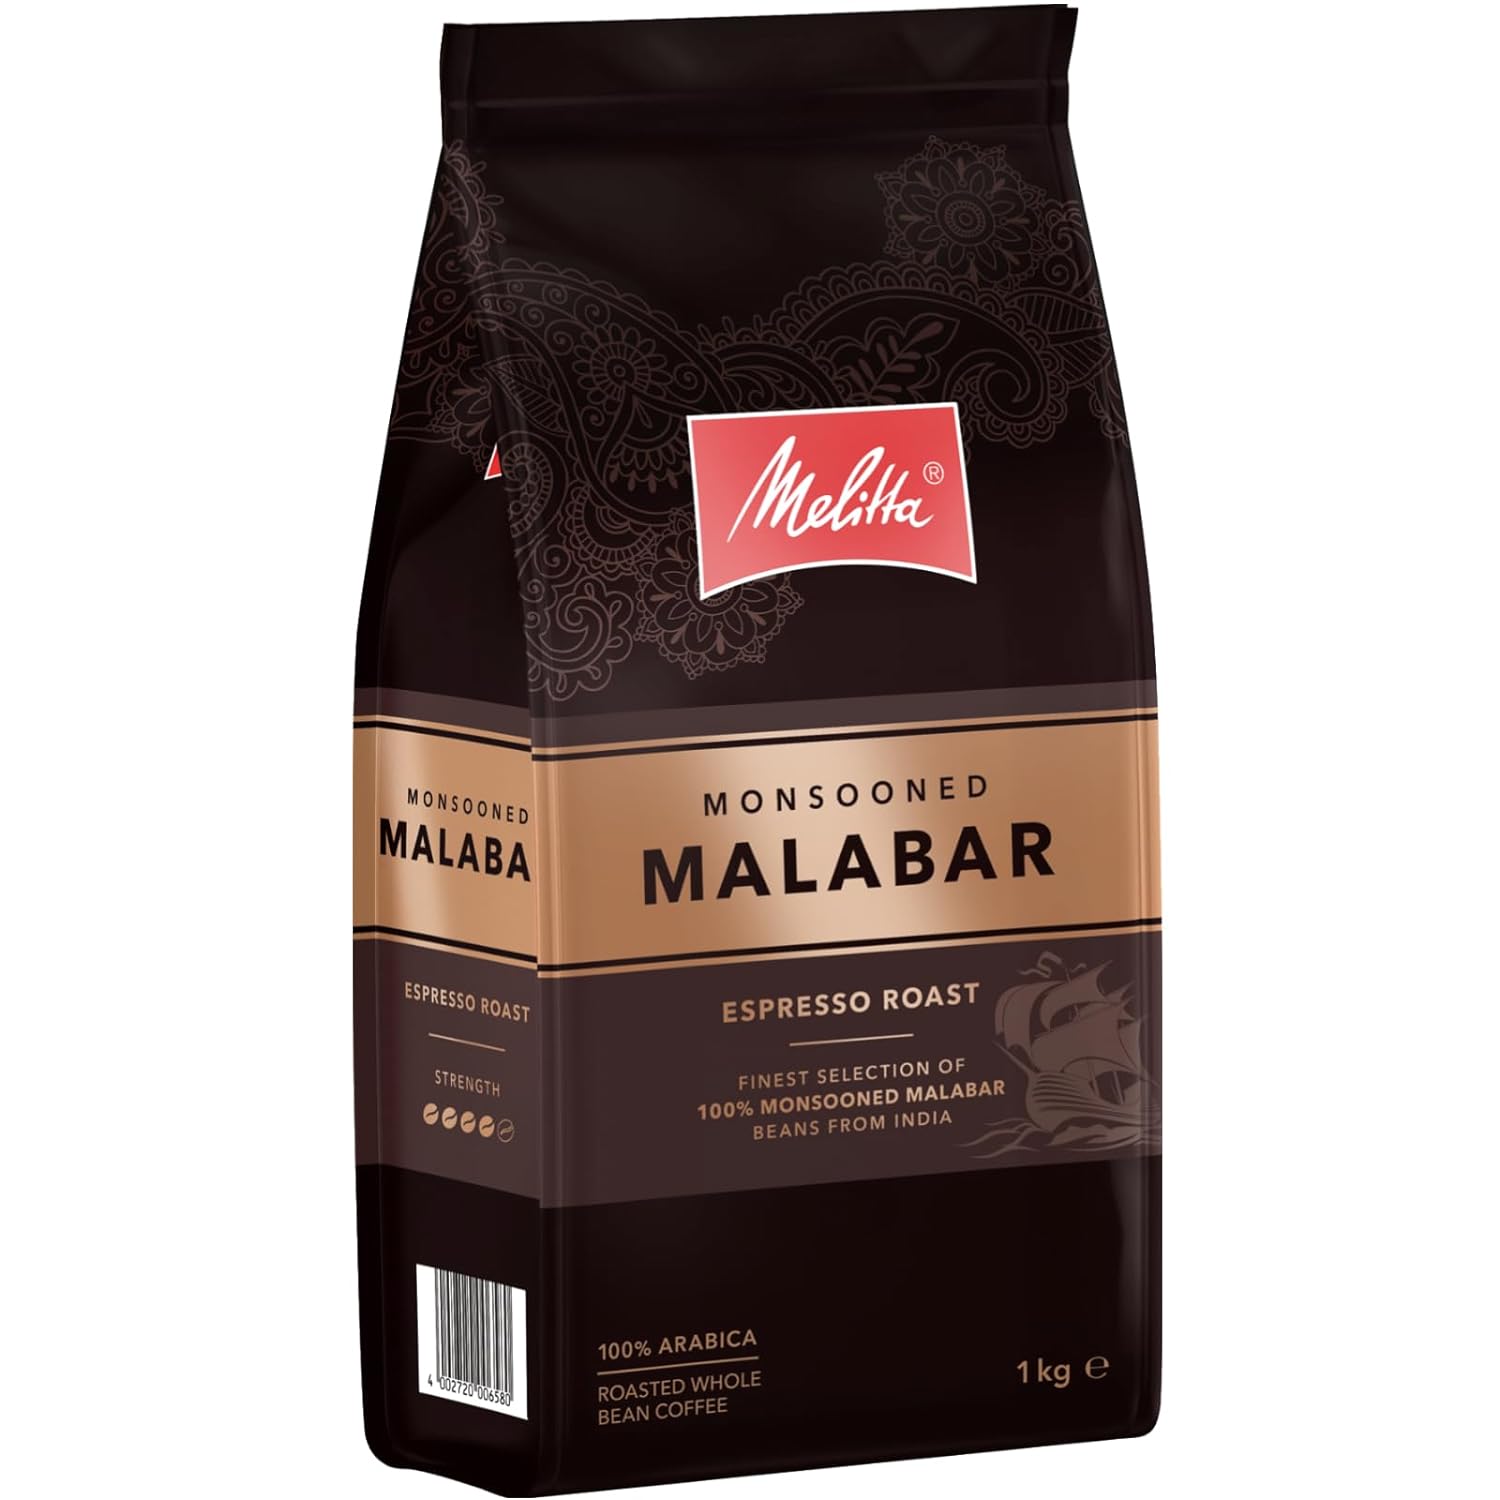 Melitta Monsooned Malabar Rare Coffee, 1 kg, Coffee Beans, Unground, 100% Arabica Beans from India, Roasted in Germany, Strength 4